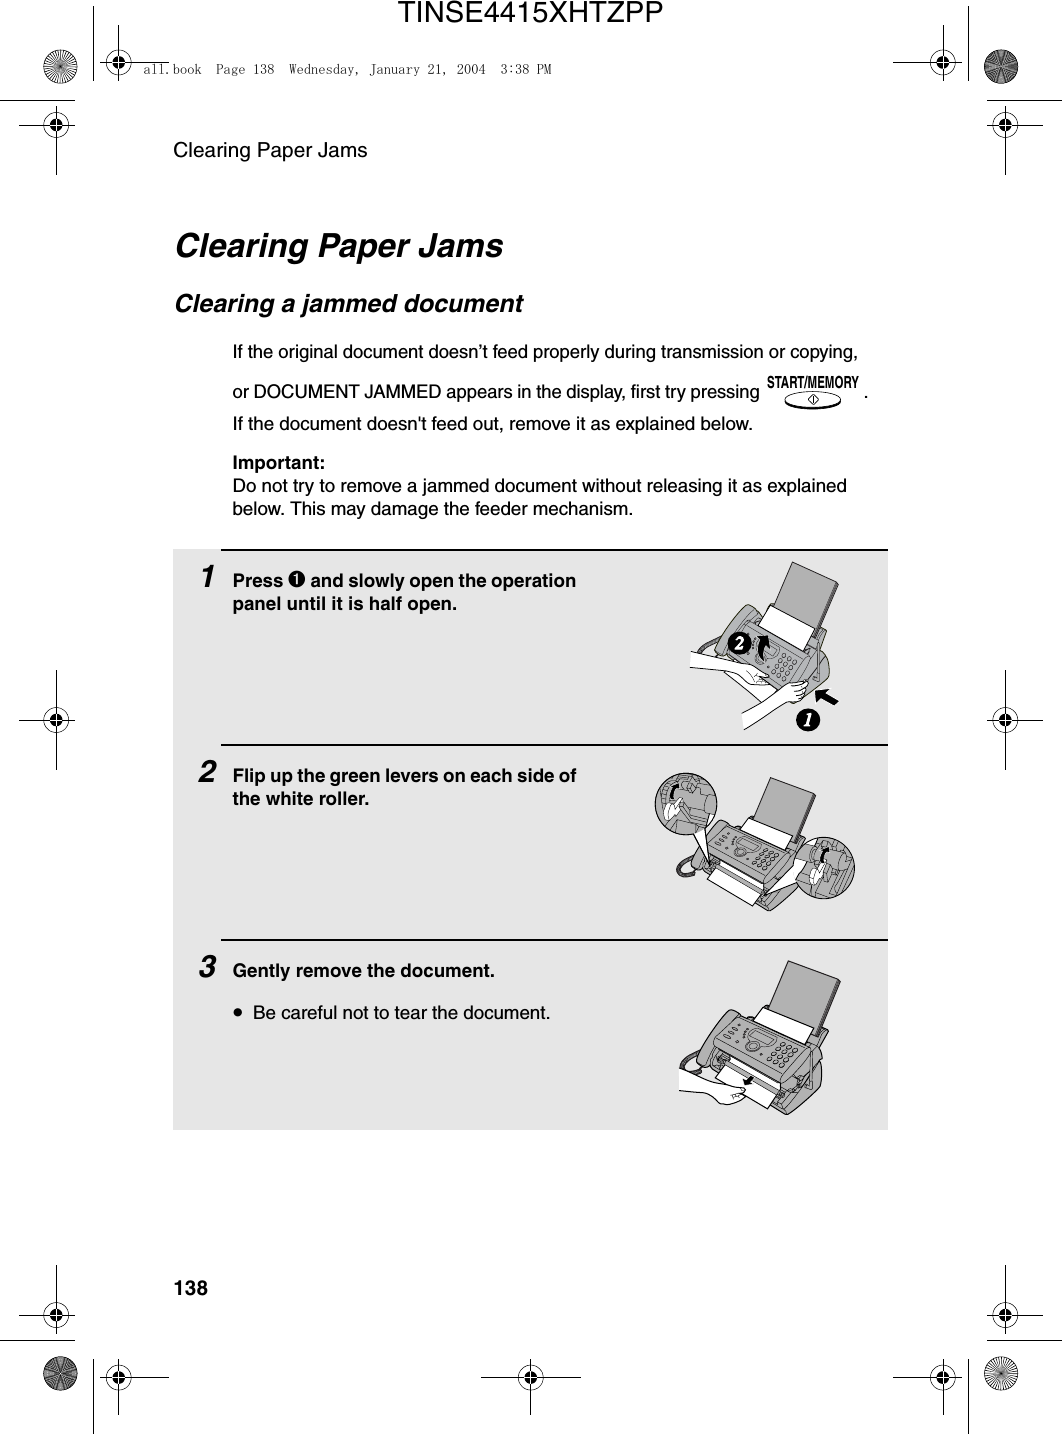 Clearing Paper Jams138Clearing Paper JamsClearing a jammed documentIf the original document doesn’t feed properly during transmission or copying, or DOCUMENT JAMMED appears in the display, first try pressing  . If the document doesn&apos;t feed out, remove it as explained below.Important:Do not try to remove a jammed document without releasing it as explained below. This may damage the feeder mechanism.START/MEMORY1Press ➊ and slowly open the operation panel until it is half open.2Flip up the green levers on each side of the white roller.3Gently remove the document.•Be careful not to tear the document.12all.book  Page 138  Wednesday, January 21, 2004  3:38 PMTINSE4415XHTZPP